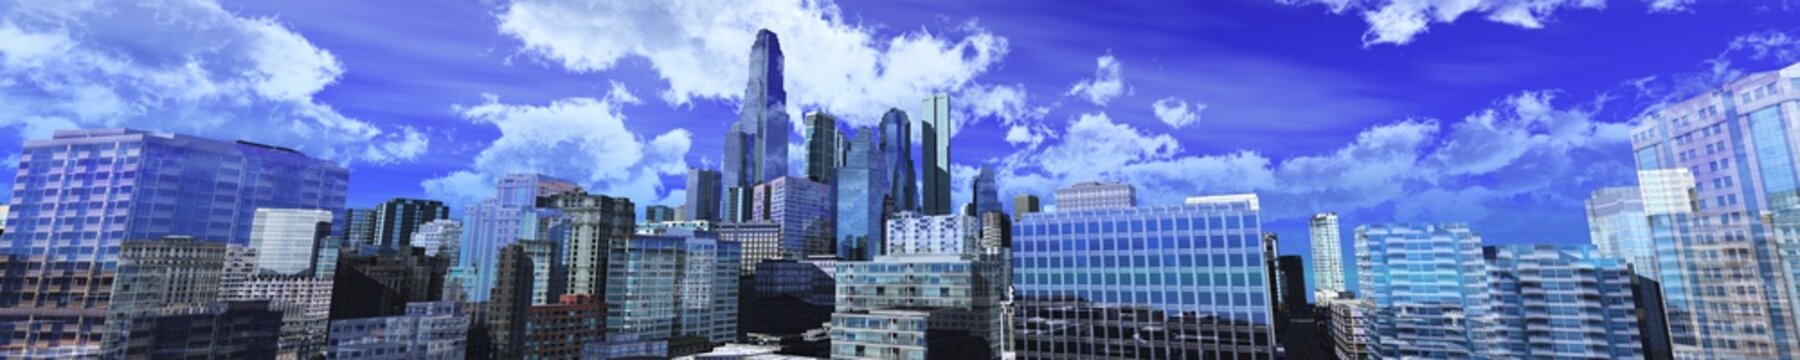 panorama of a modern city, a beautiful city against a sky with clouds, banner, 3d rendering
